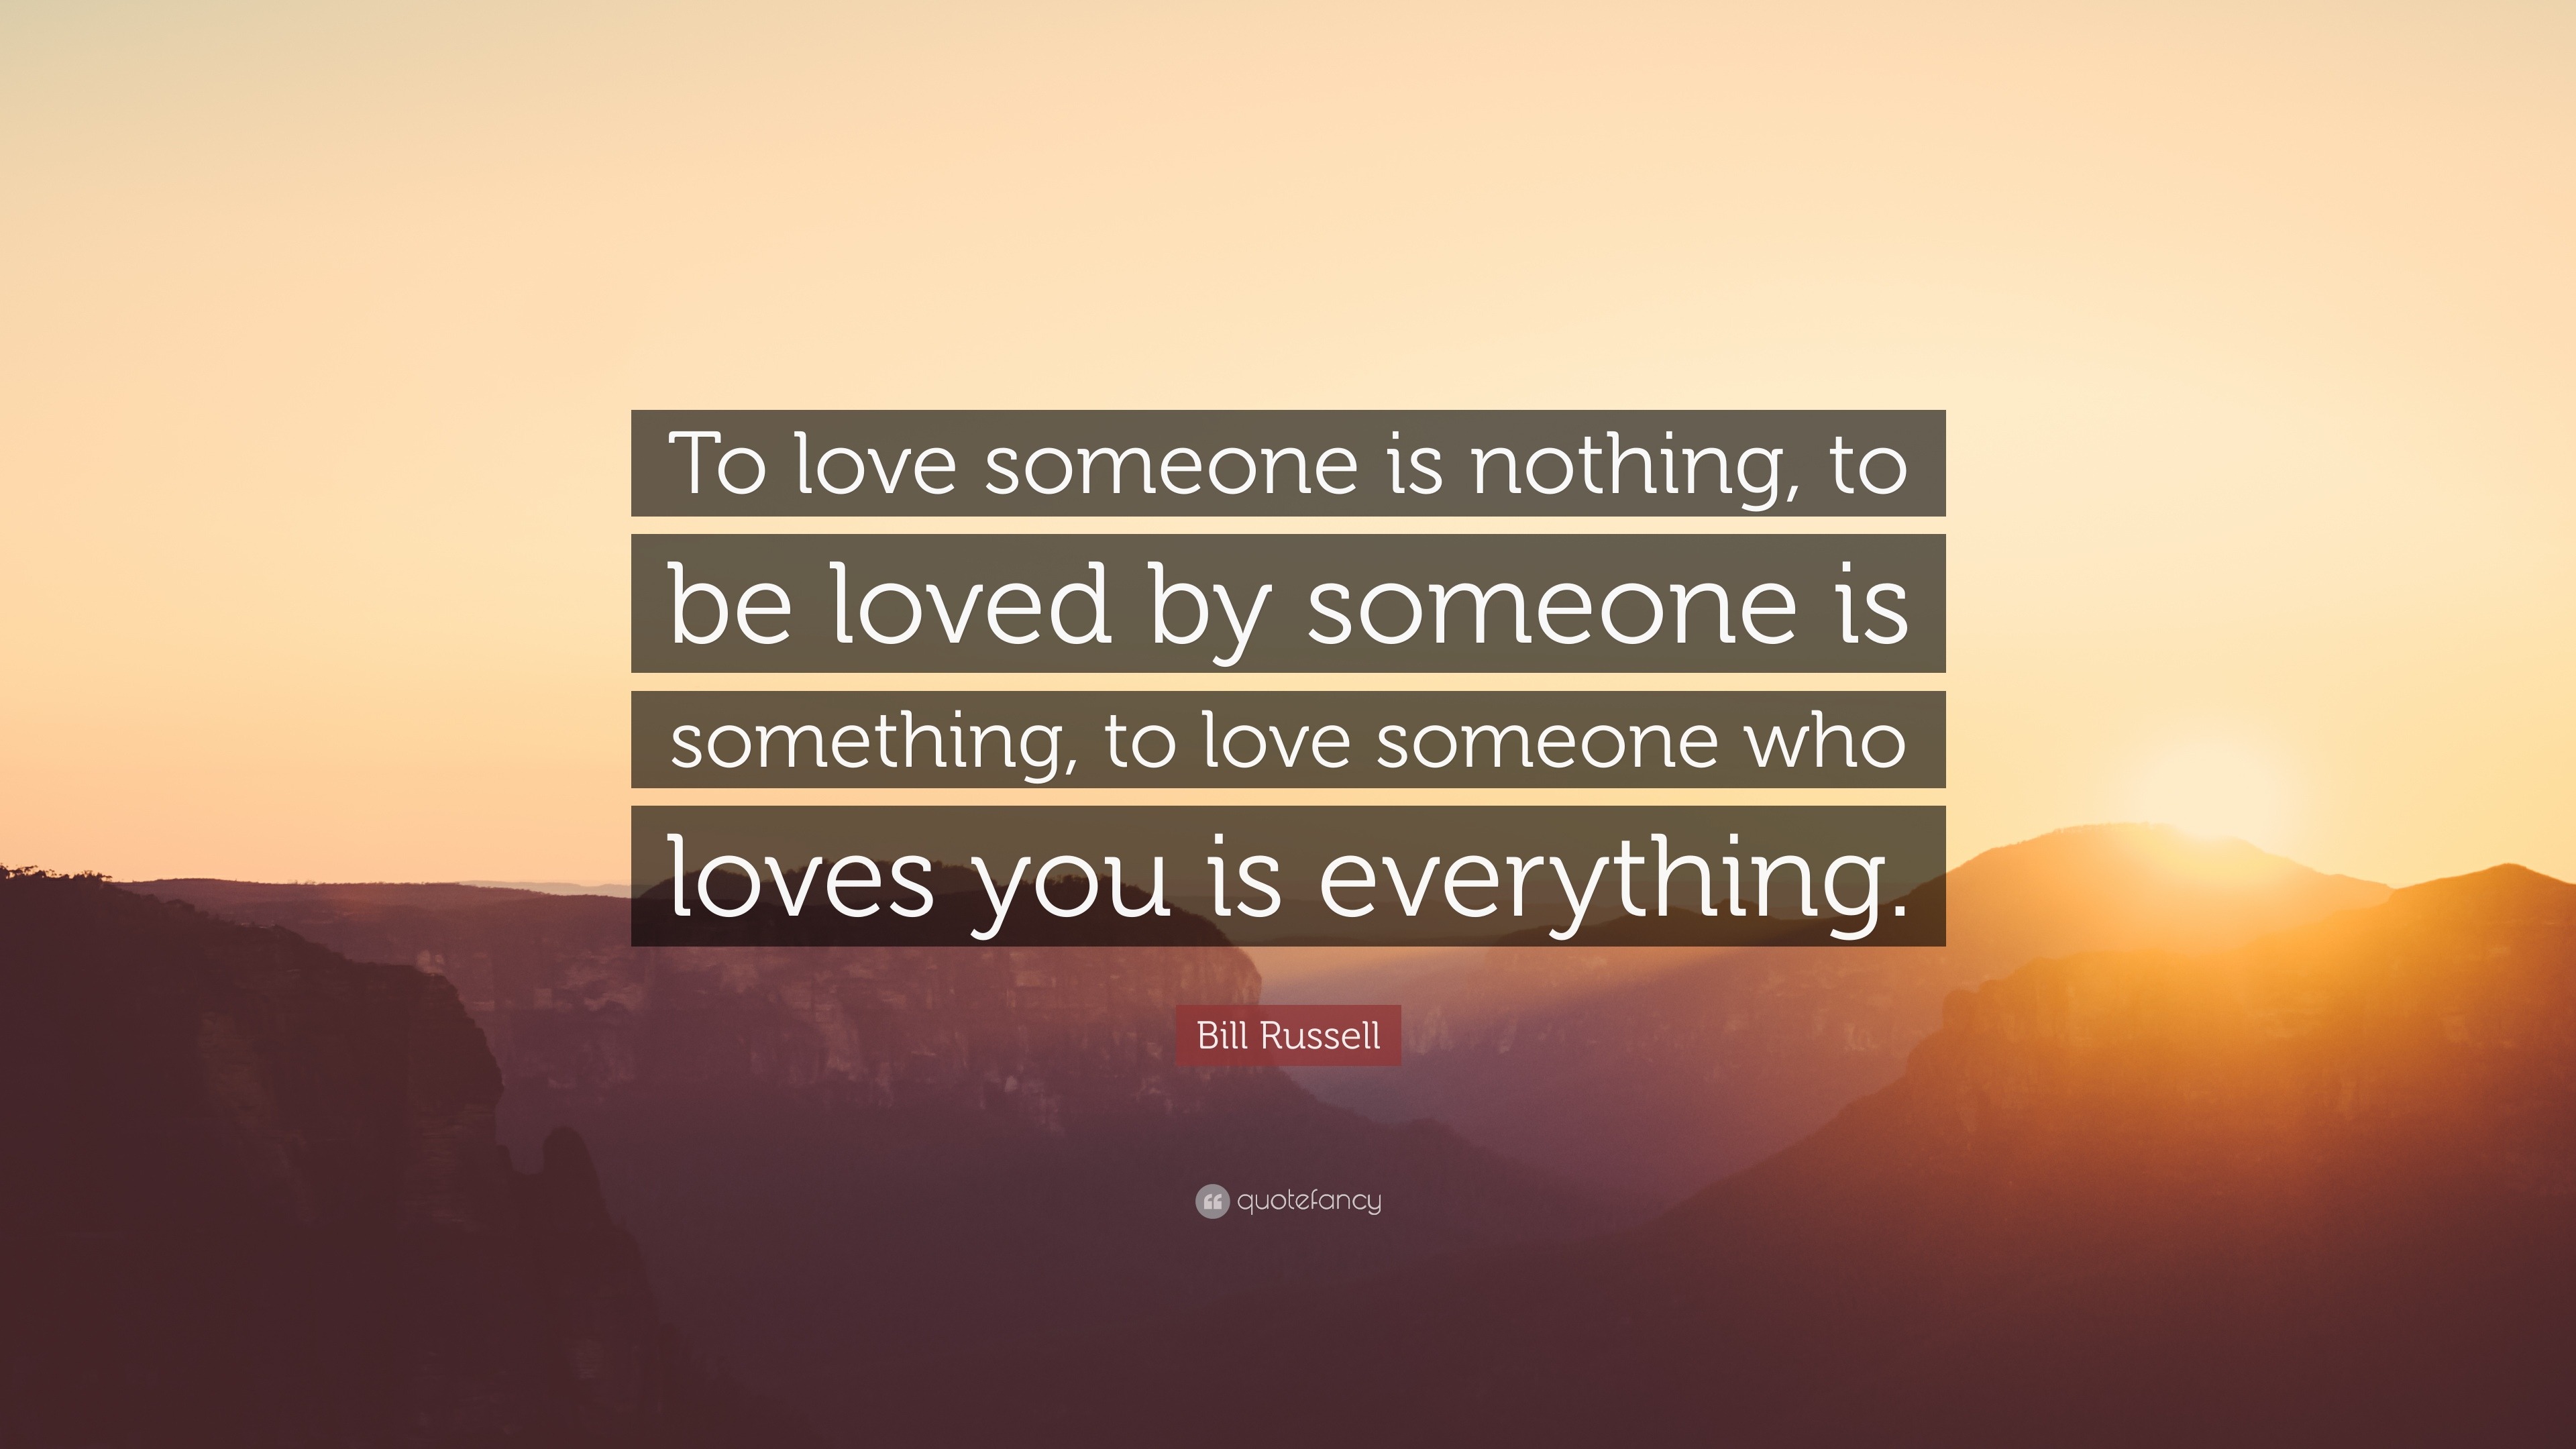 Bill Russell Quote “To love someone is nothing to be loved by someone